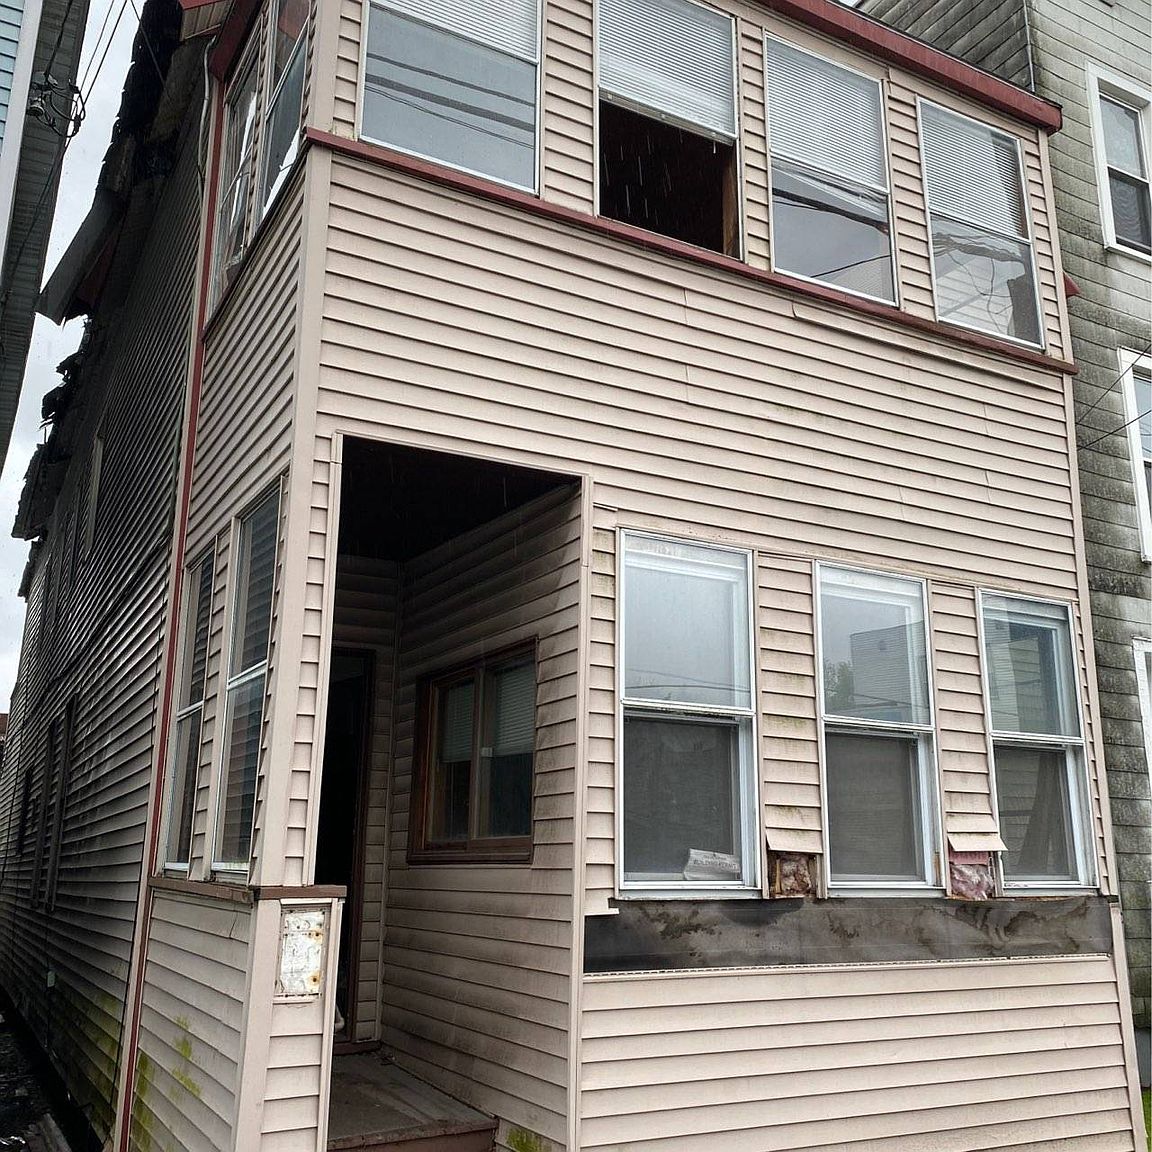 114 Ontario St, Cohoes NY Foreclosure Property